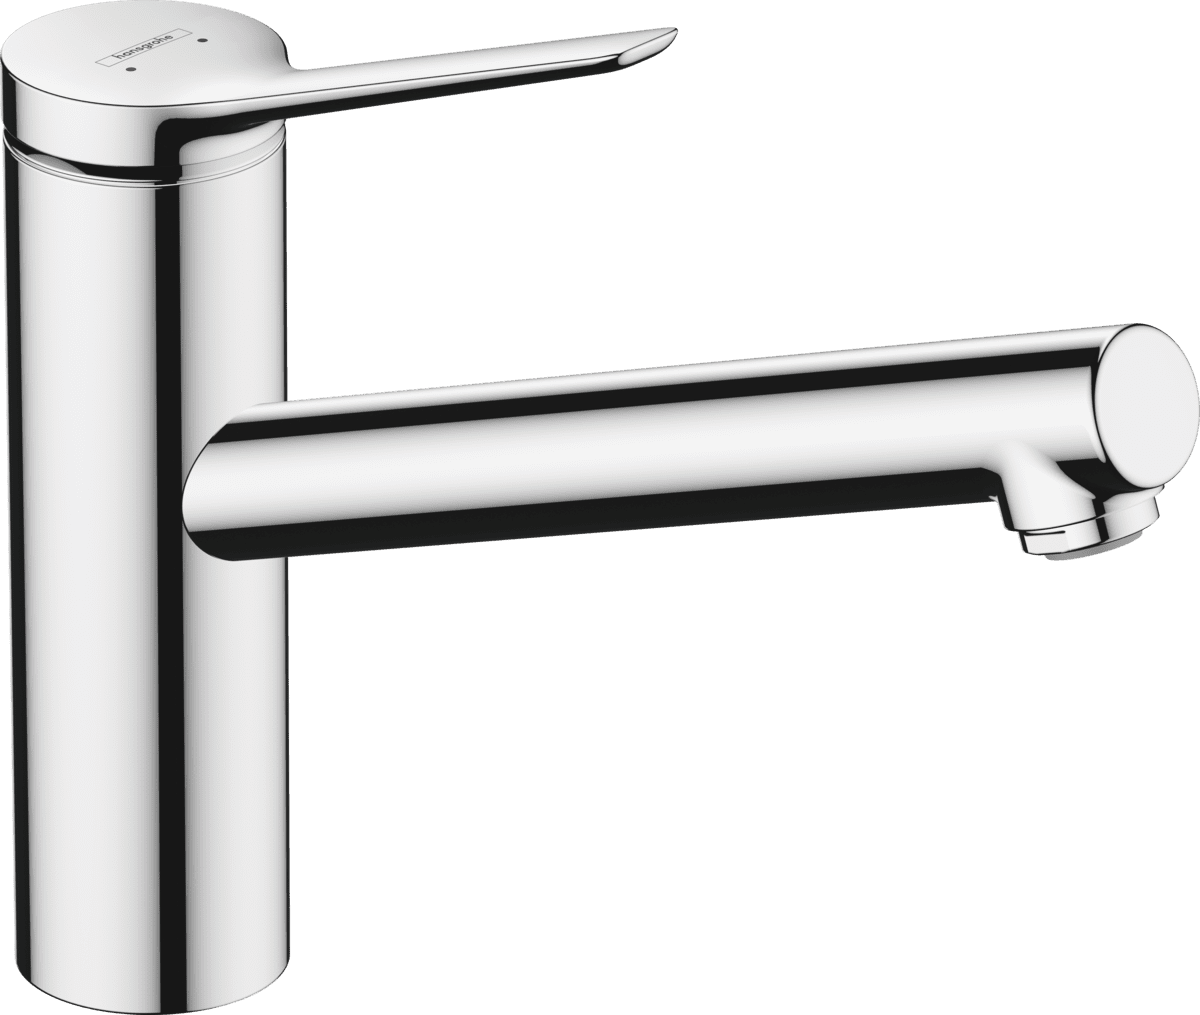 Picture of HANSGROHE Zesis M33 Single lever kitchen mixer 150, LowPressure/vented hot water cylinders, 1jet #74806000 - Chrome